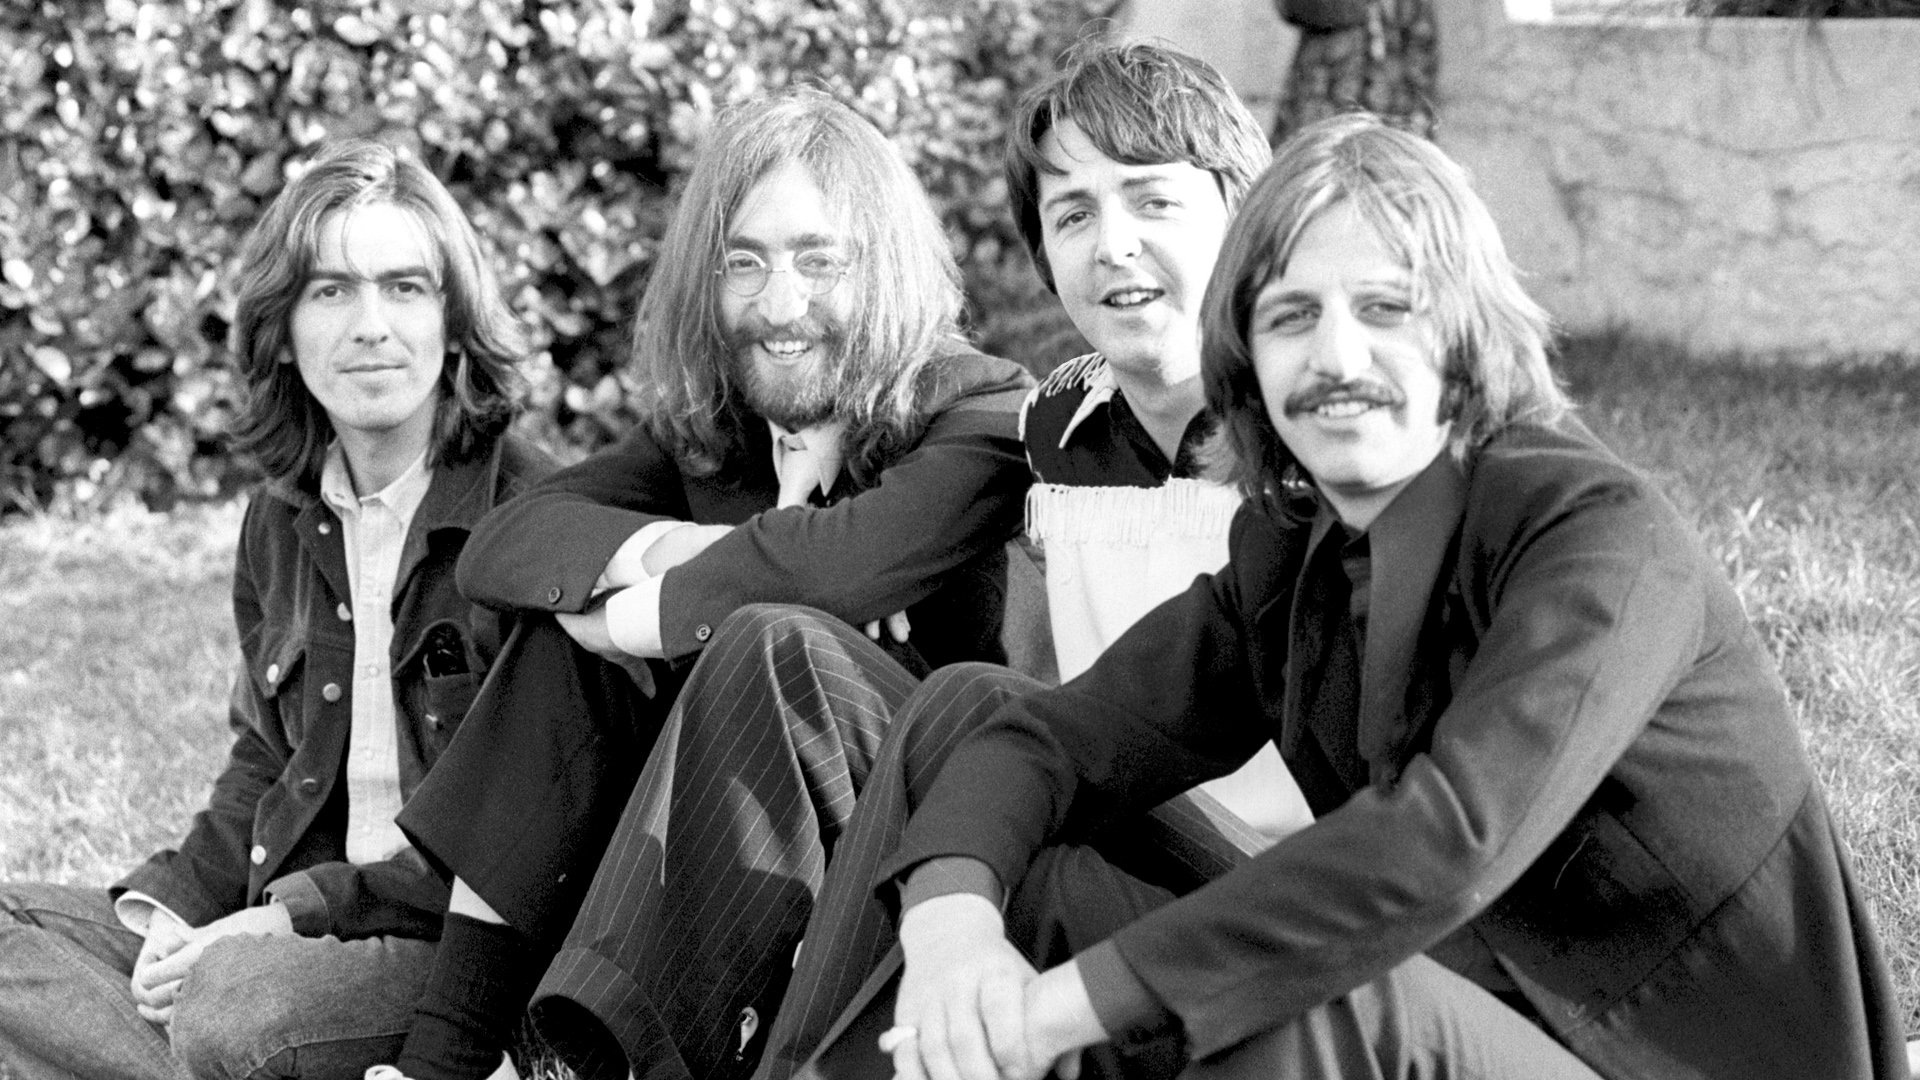 The Beatles wallpaper, Background image, Music icon, Rock and roll legends, 1920x1080 Full HD Desktop